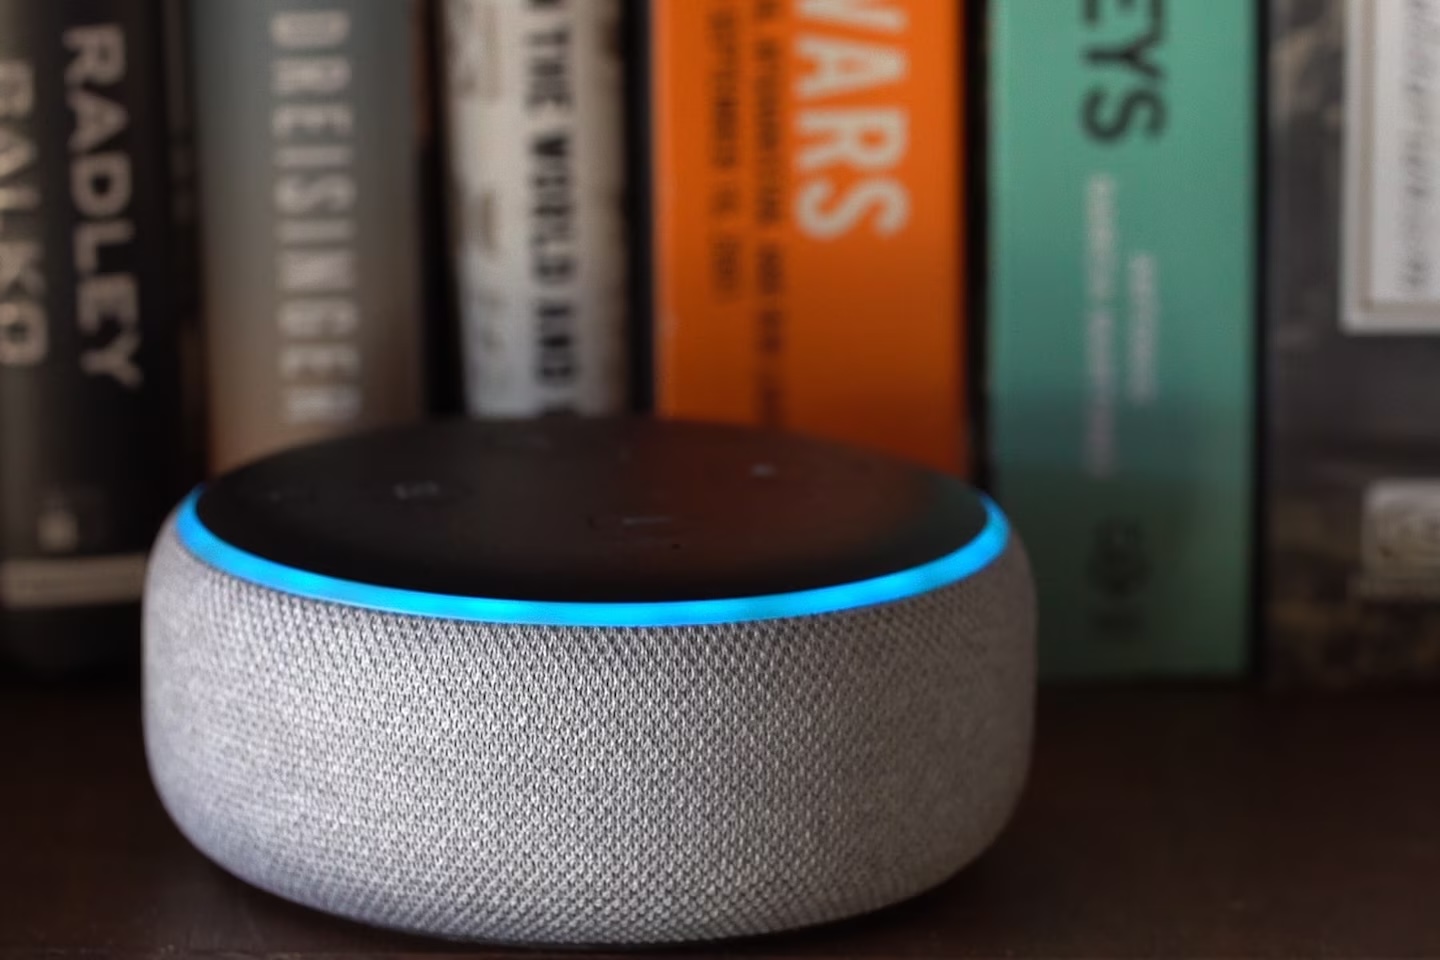 What Samples Are Available On Alexa